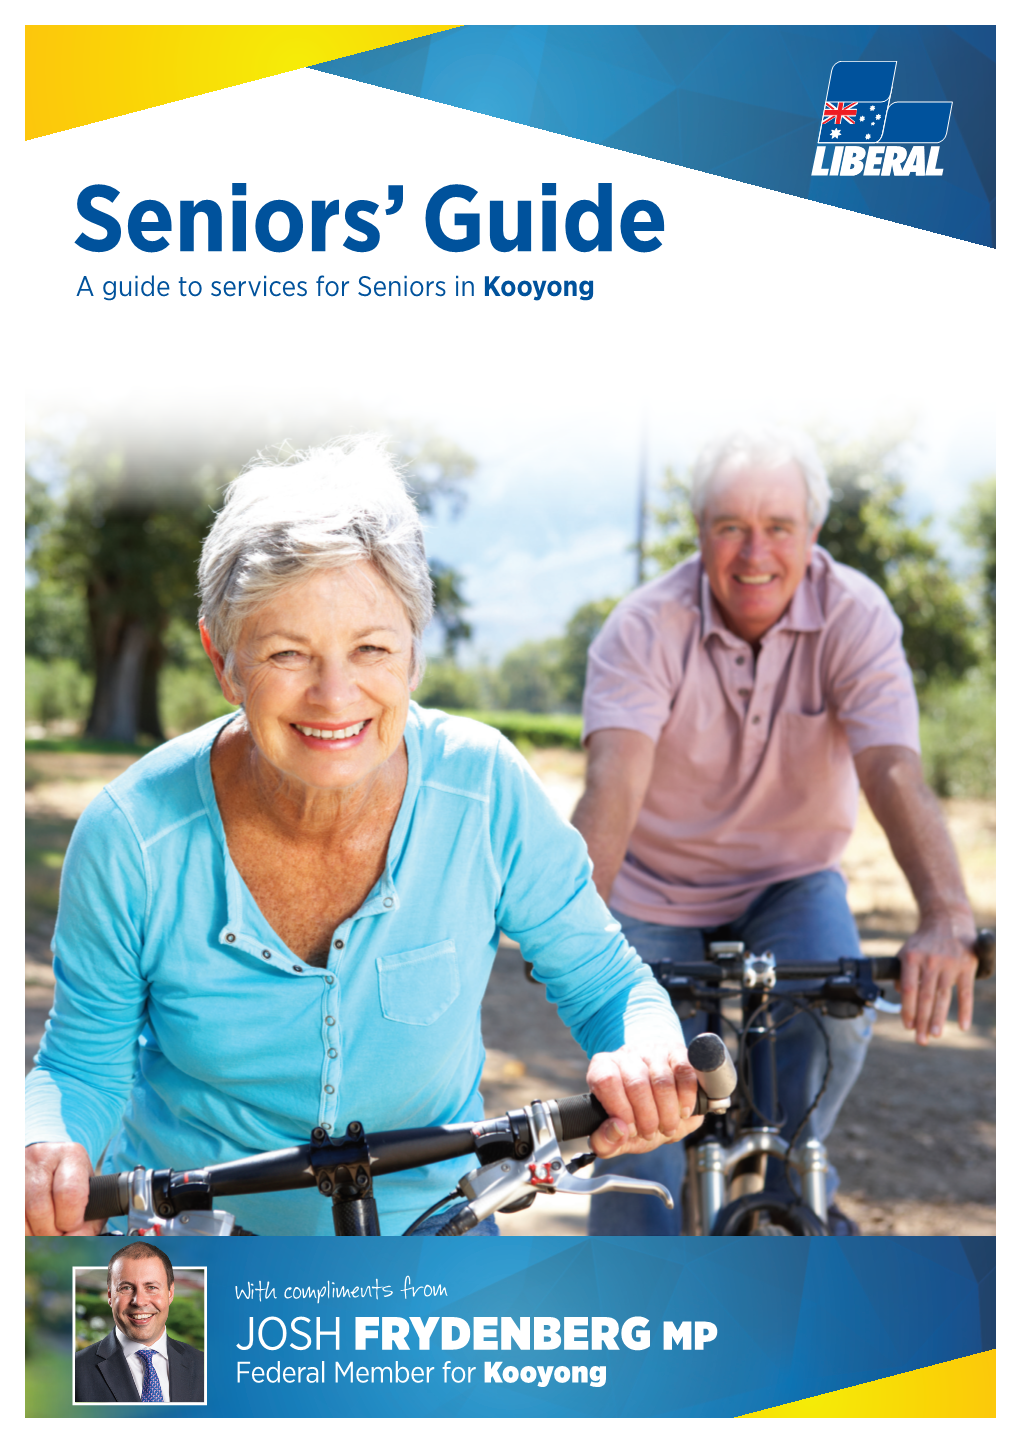 A Guide to Services for Seniors in Kooyong